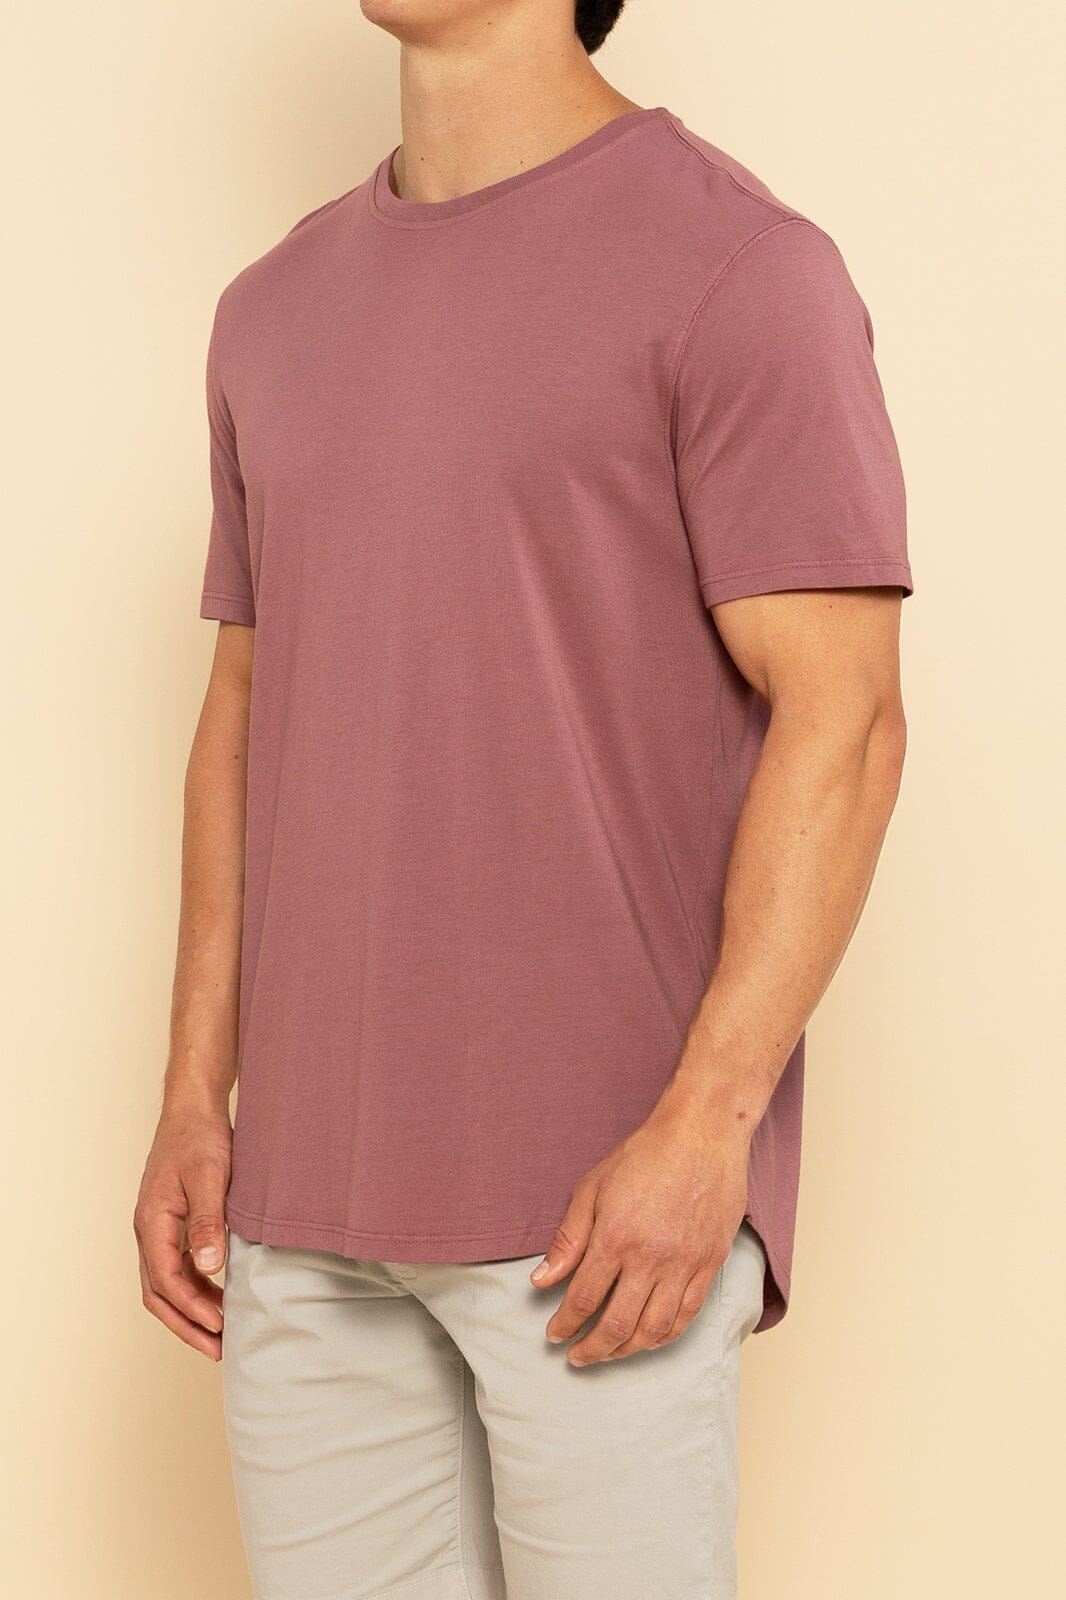 Salmon Curved Hem Tee For Men - Front Side Angle